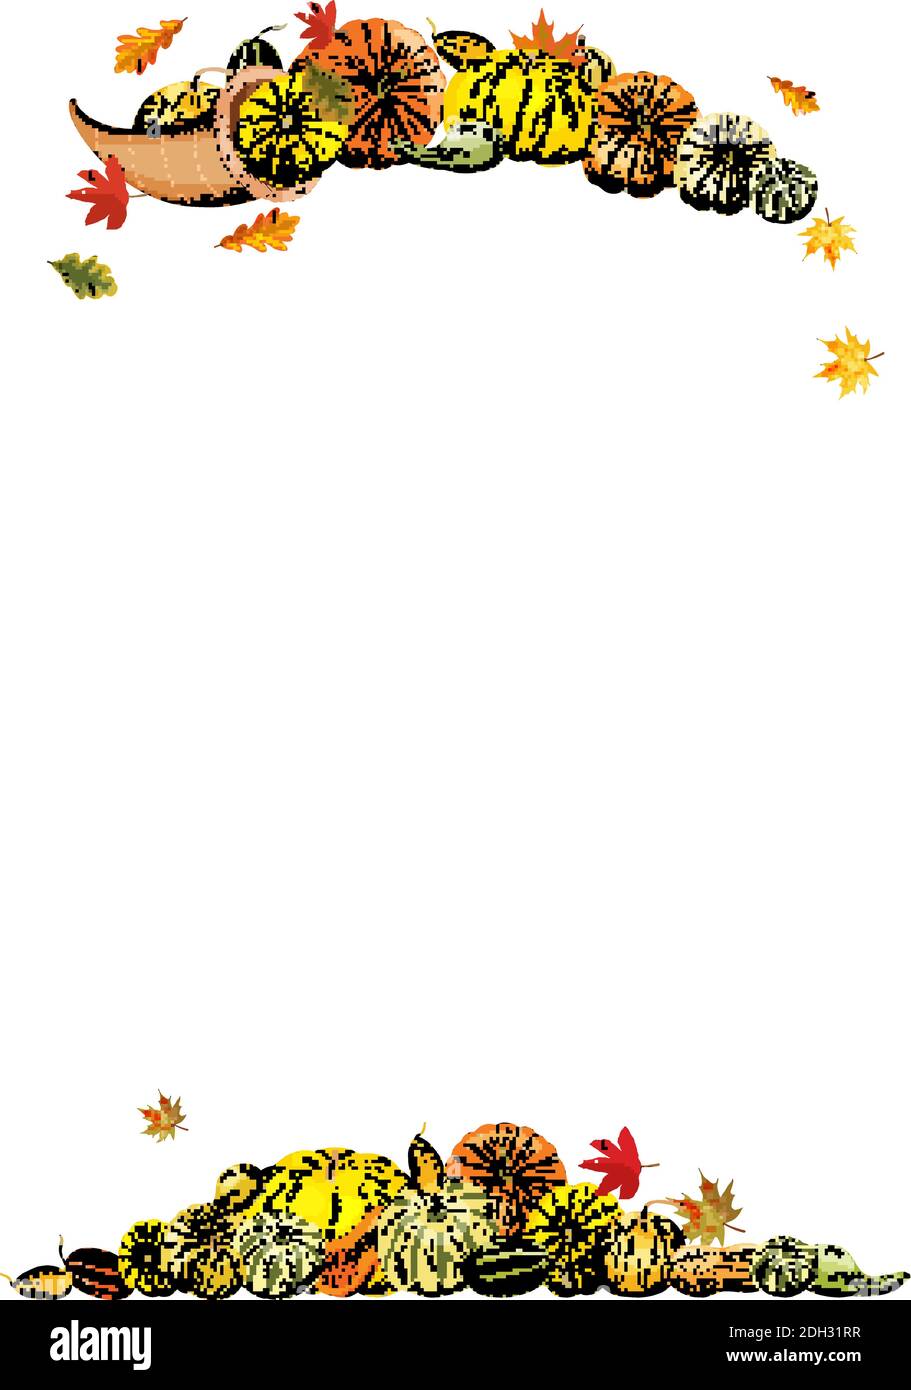 Autumn frame isolated on white background. Pumpkins, leaves. Stock Vector